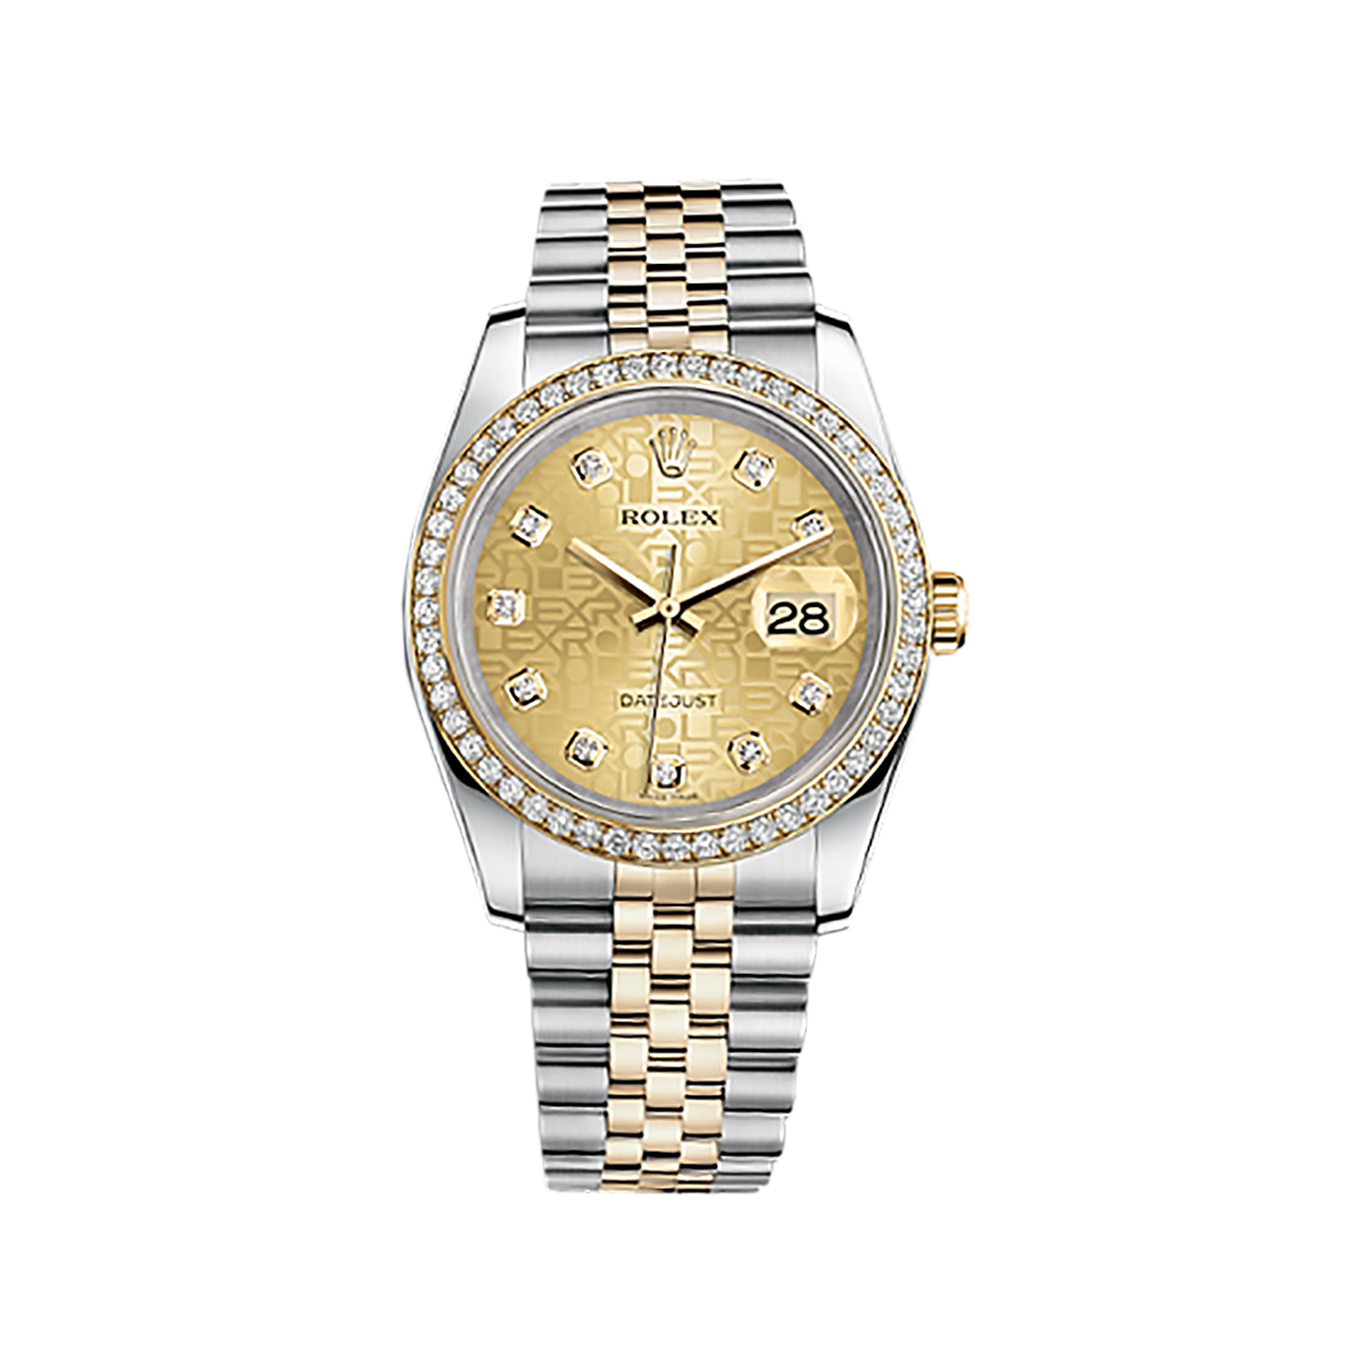 Datejust 36 116243 Gold & Stainless Steel Watch (Champagne Jubilee Design Set with Diamonds) - Click Image to Close